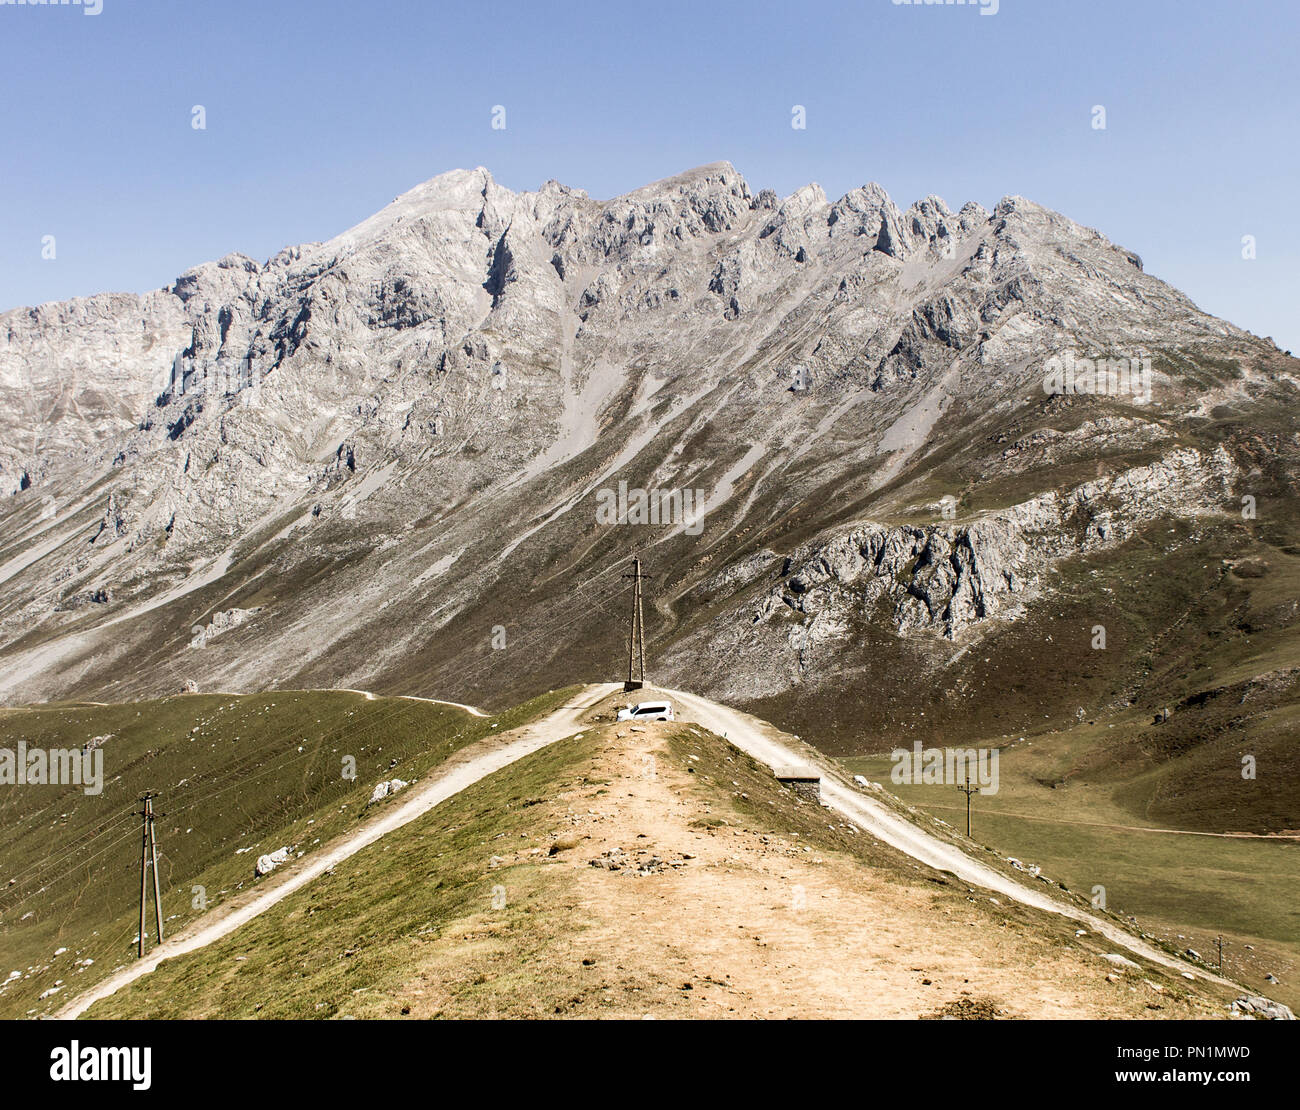 Road along the mountains on a clear day. Stock Photo